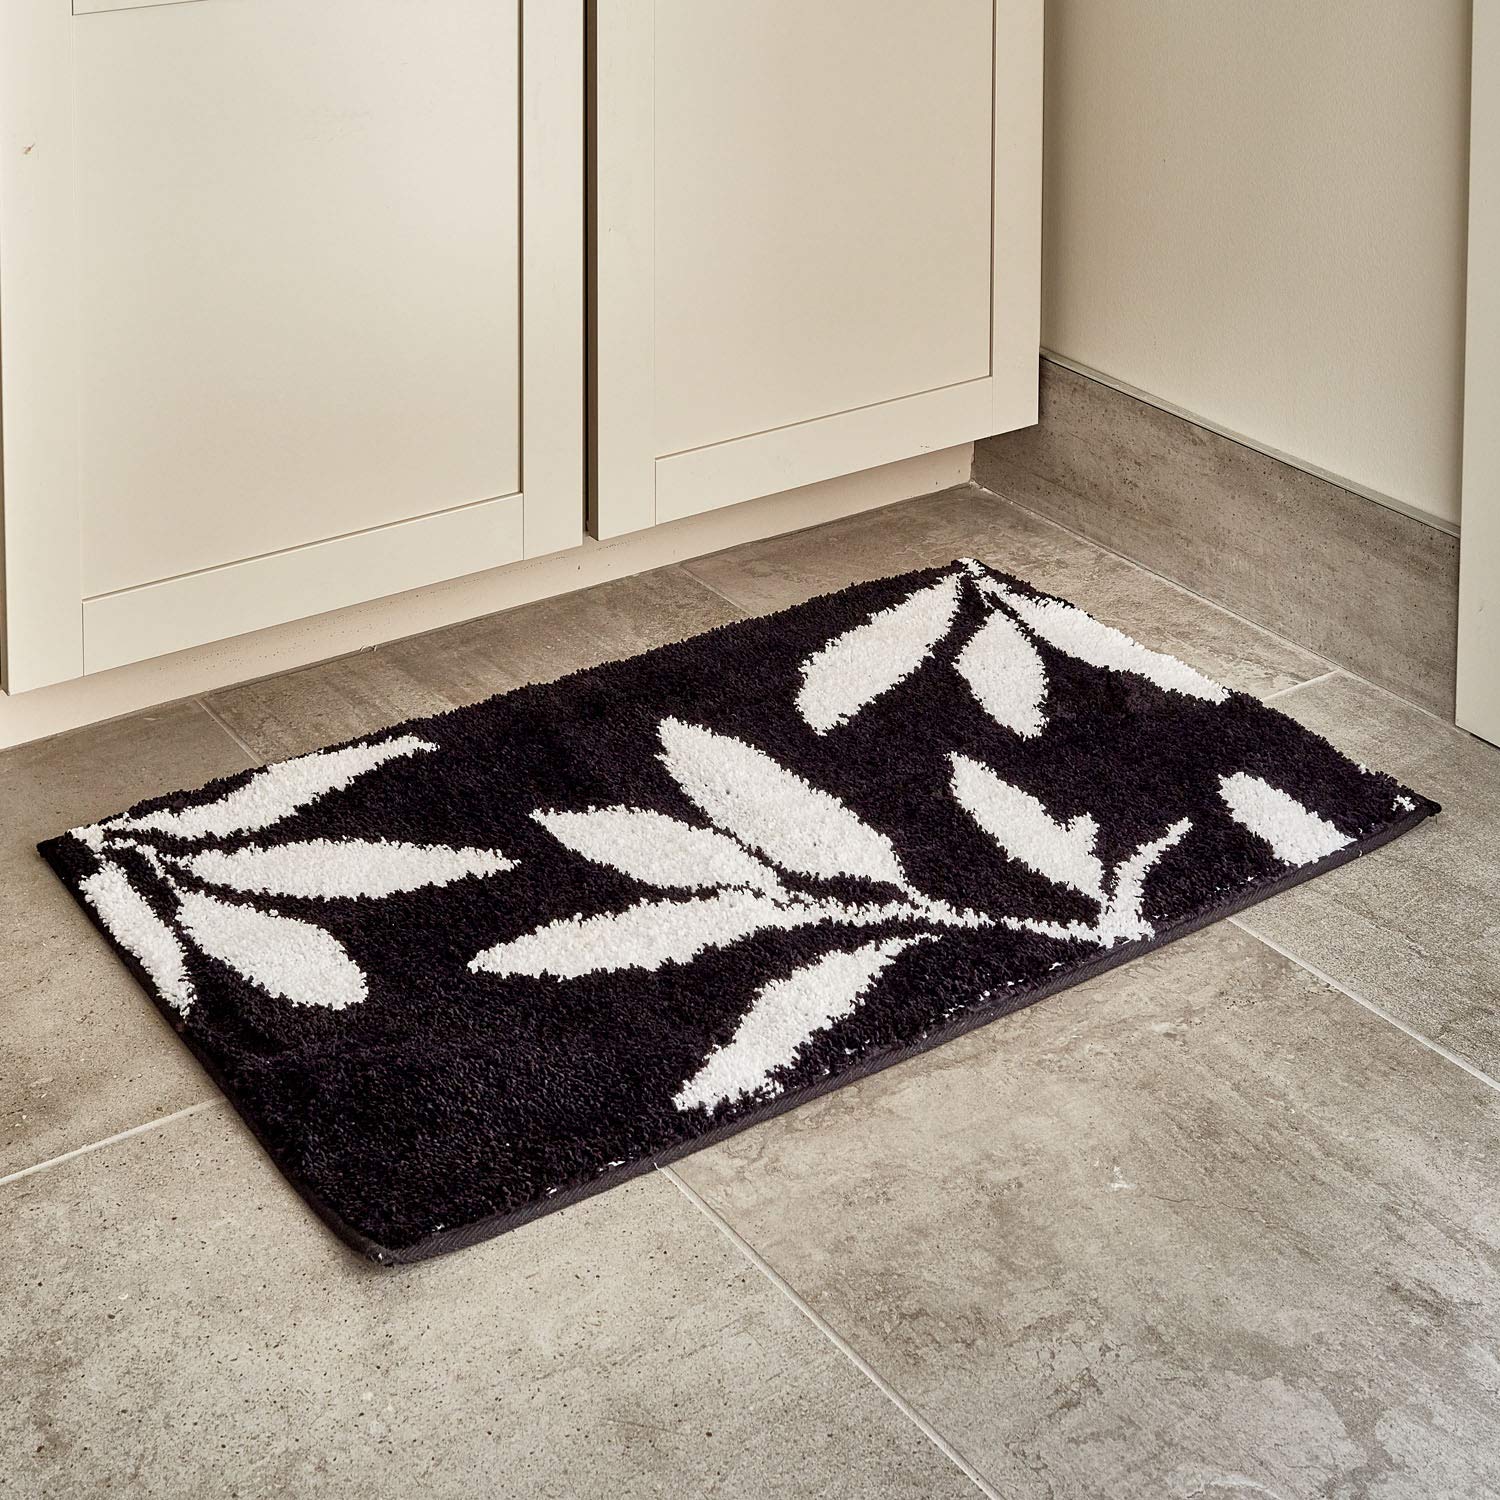 Book Cover iDesign Microfiber Leaves Accent Shower Rug, Bath Mat for Master, Guest, Kids' Bathroom, Entryway, 34